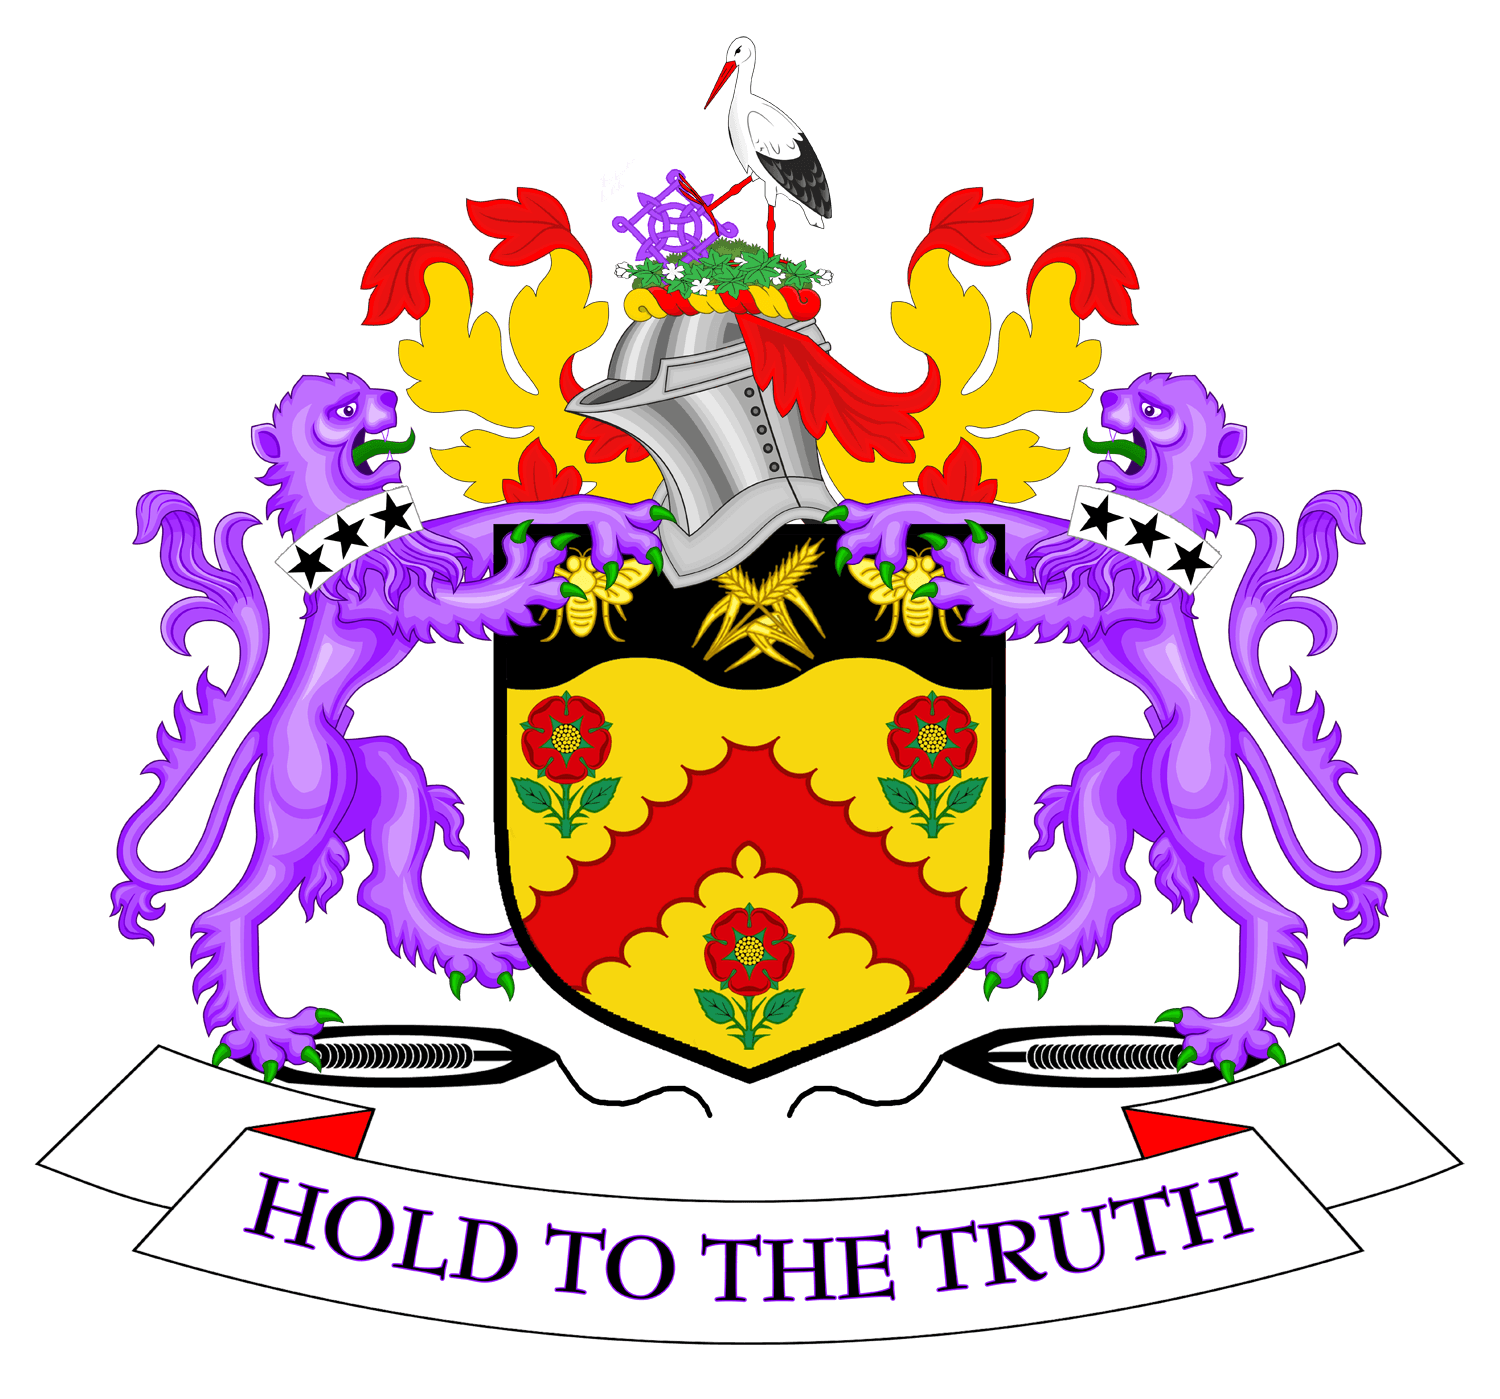 Burnley Logo - File:Coat of arms of Burnley Borough Council.png - Wikimedia Commons